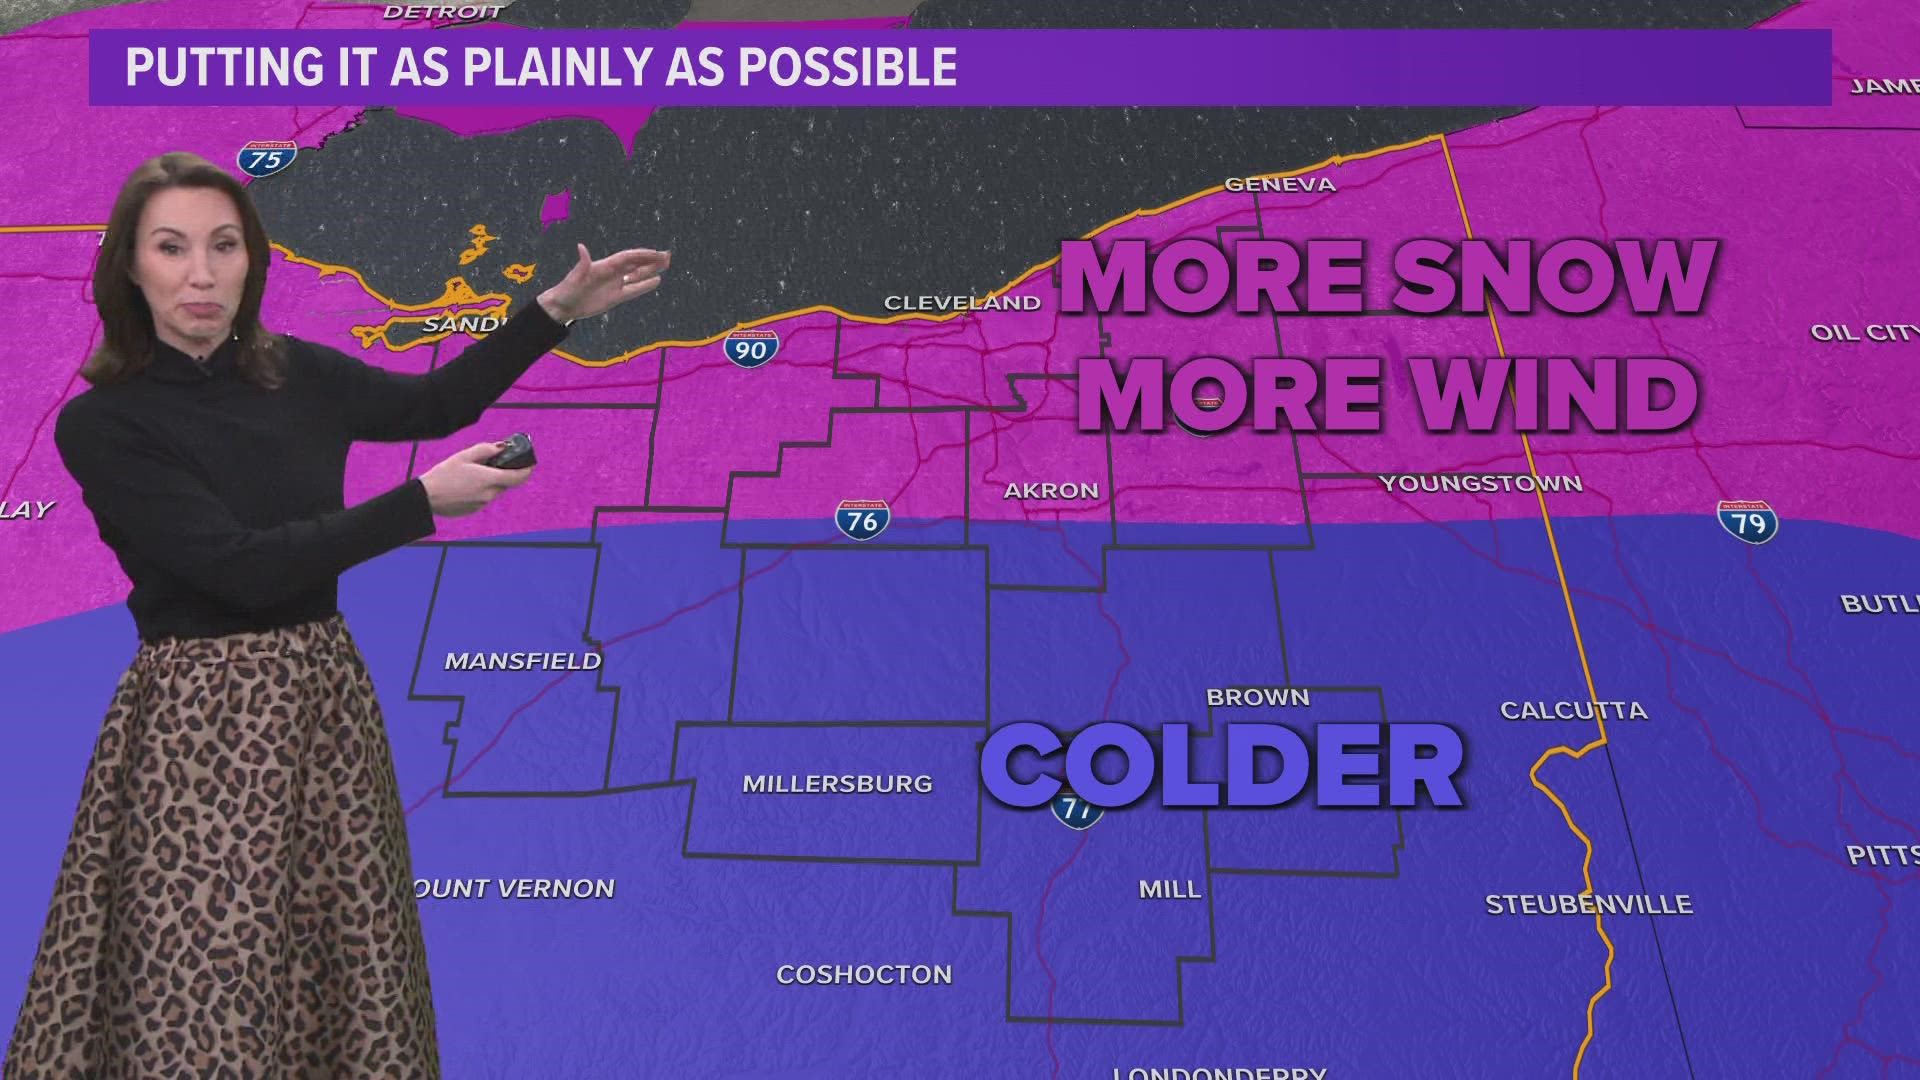 The winter storm is expected to bring strong winds, dangerously cold temperatures, and snow.